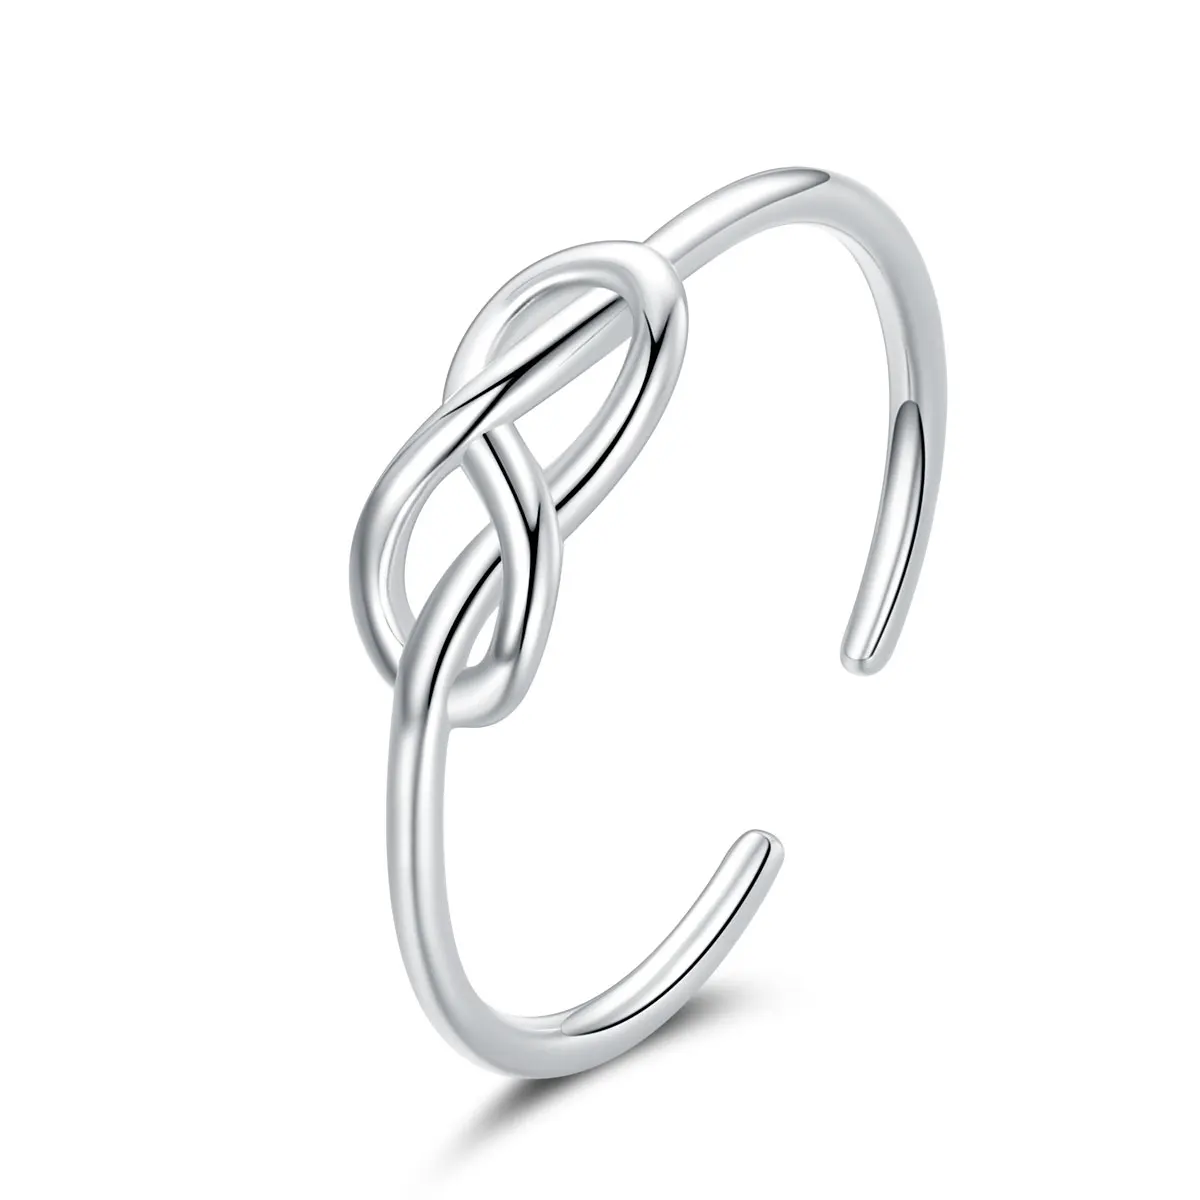 

BAMOER Authentic 925 Sterling Silver Geometric Infinity Symbol Finger Rings for Women Engagement Statement Jewelry BSR143